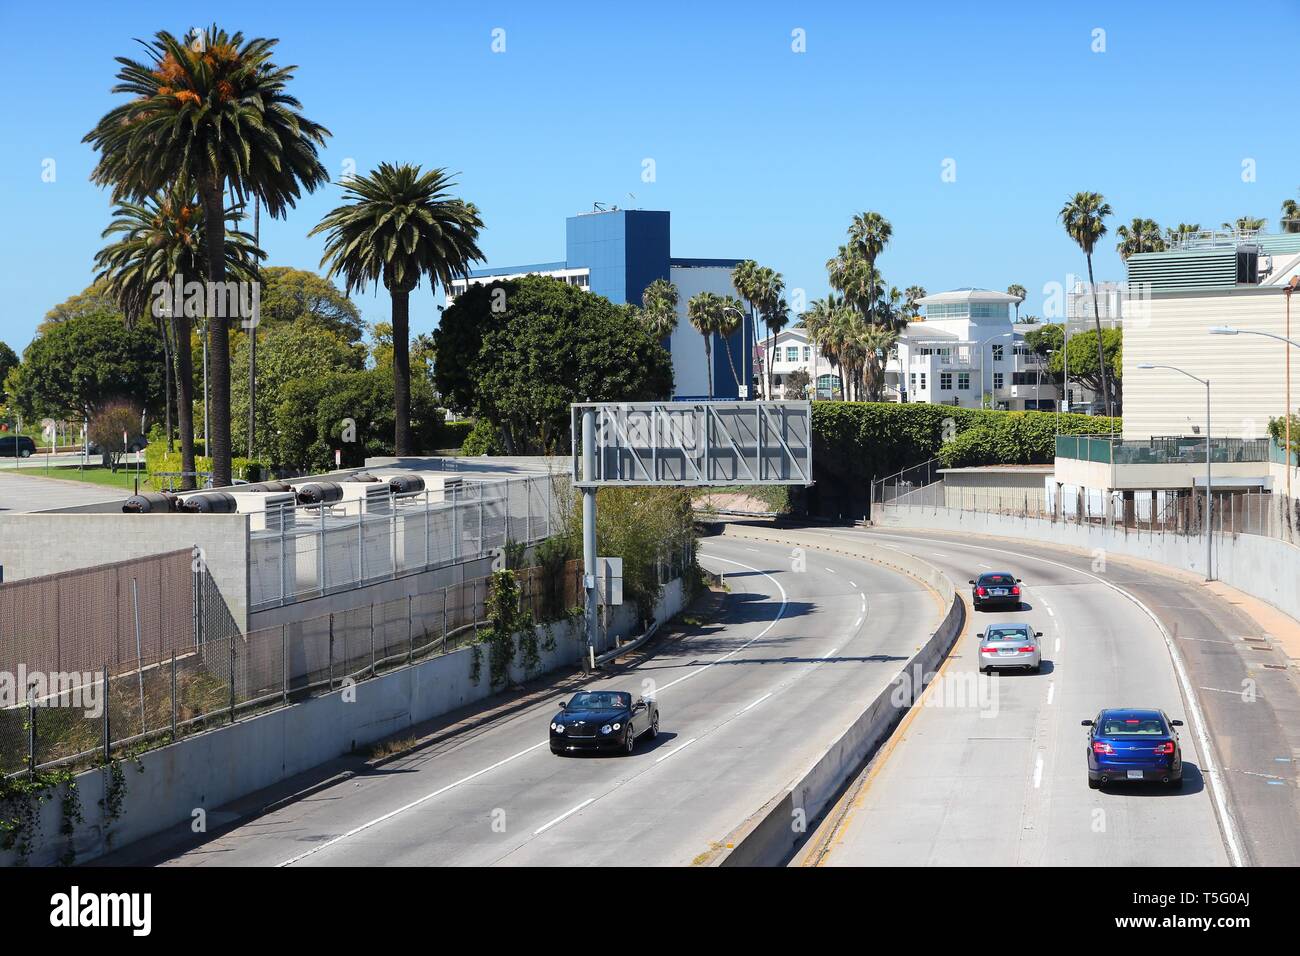 SANTA MONICA, UNITED STATES - APRIL 6, 2014: People drive Interstate 10 highway in Santa Monica, California. The freeway is part of 47,856 miles long  Stock Photo